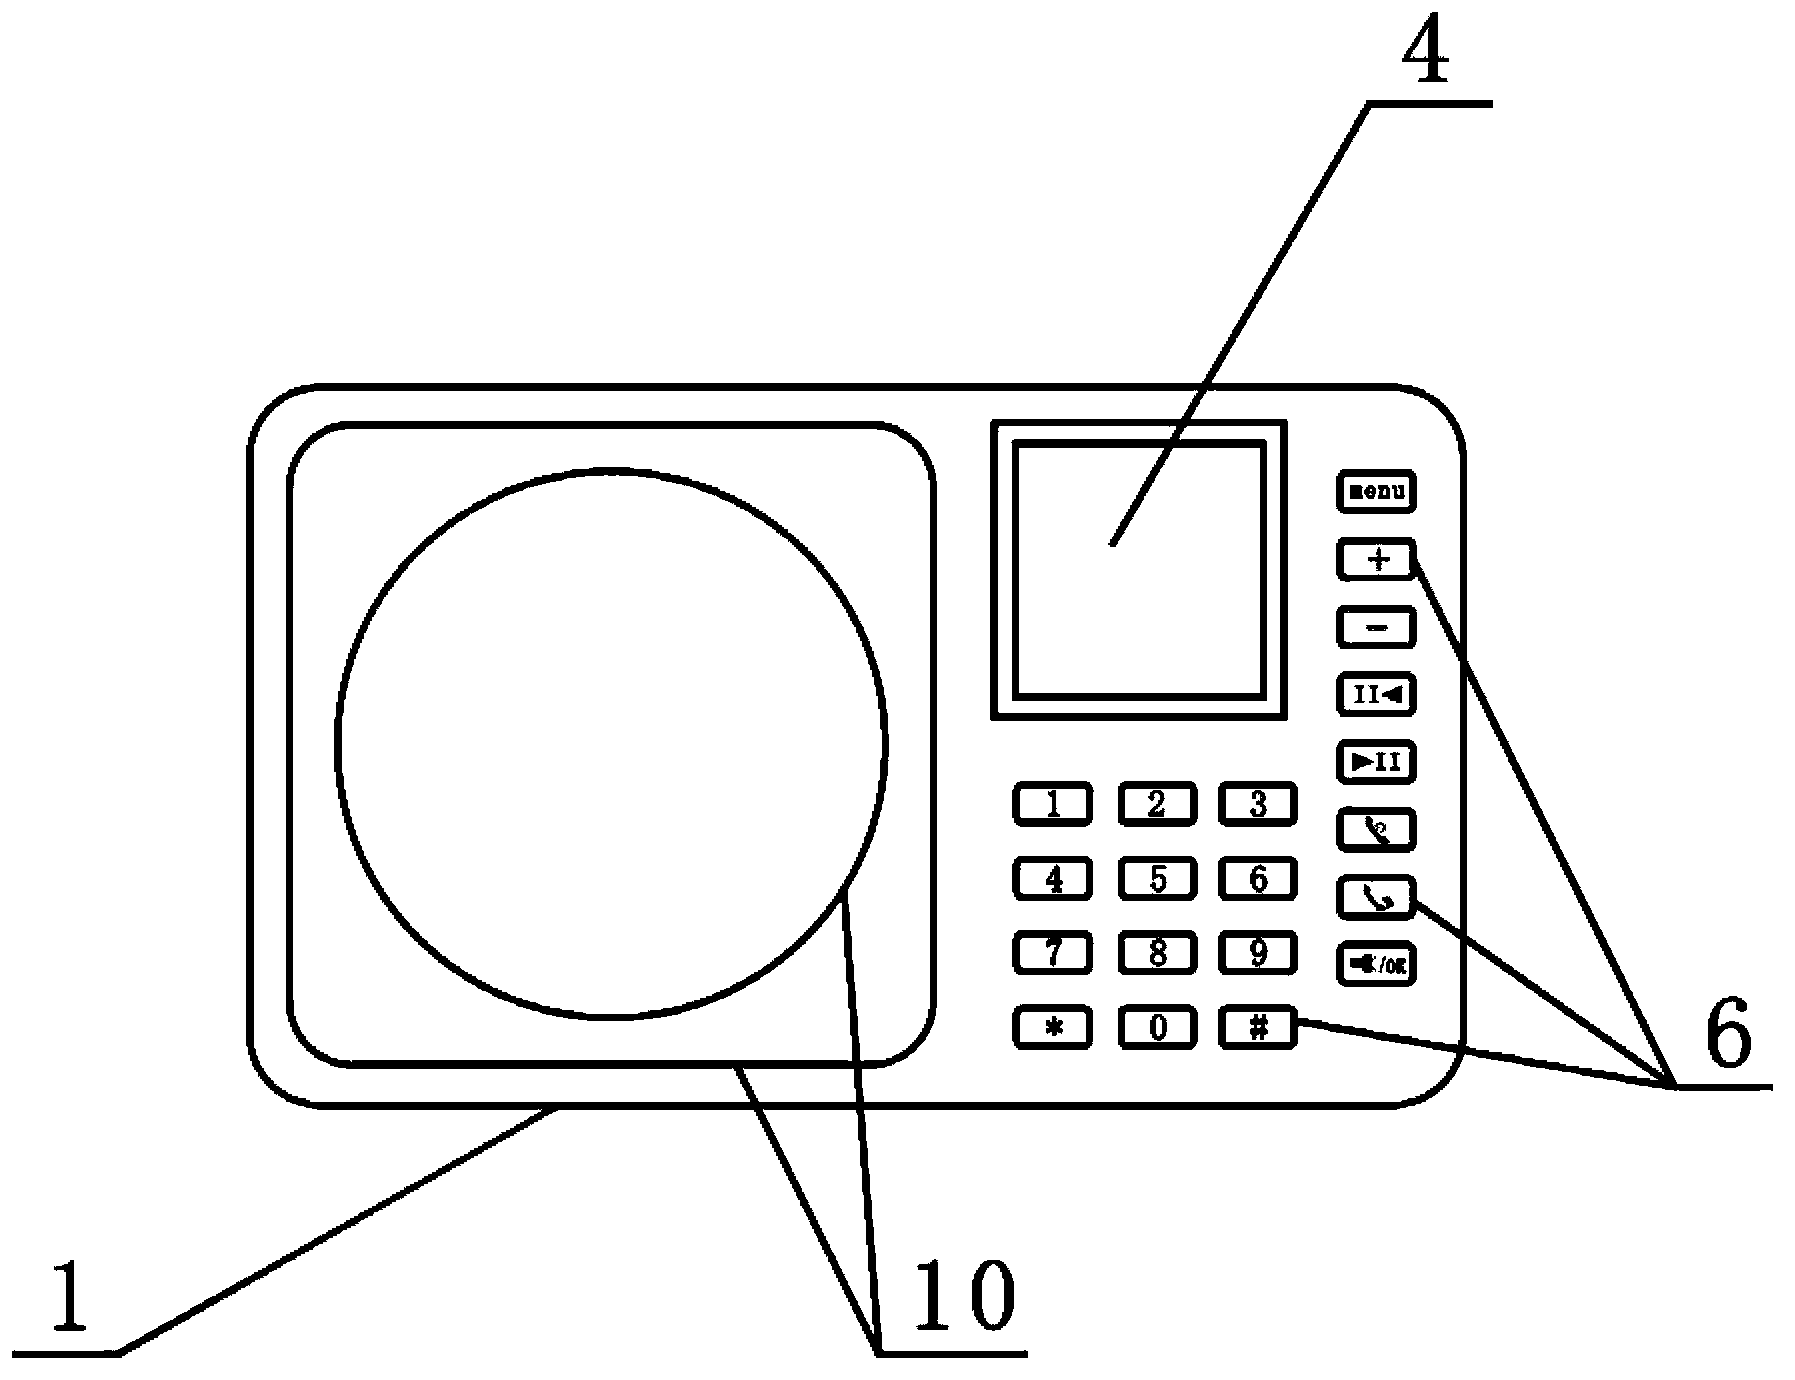 Radio with mobile phone function